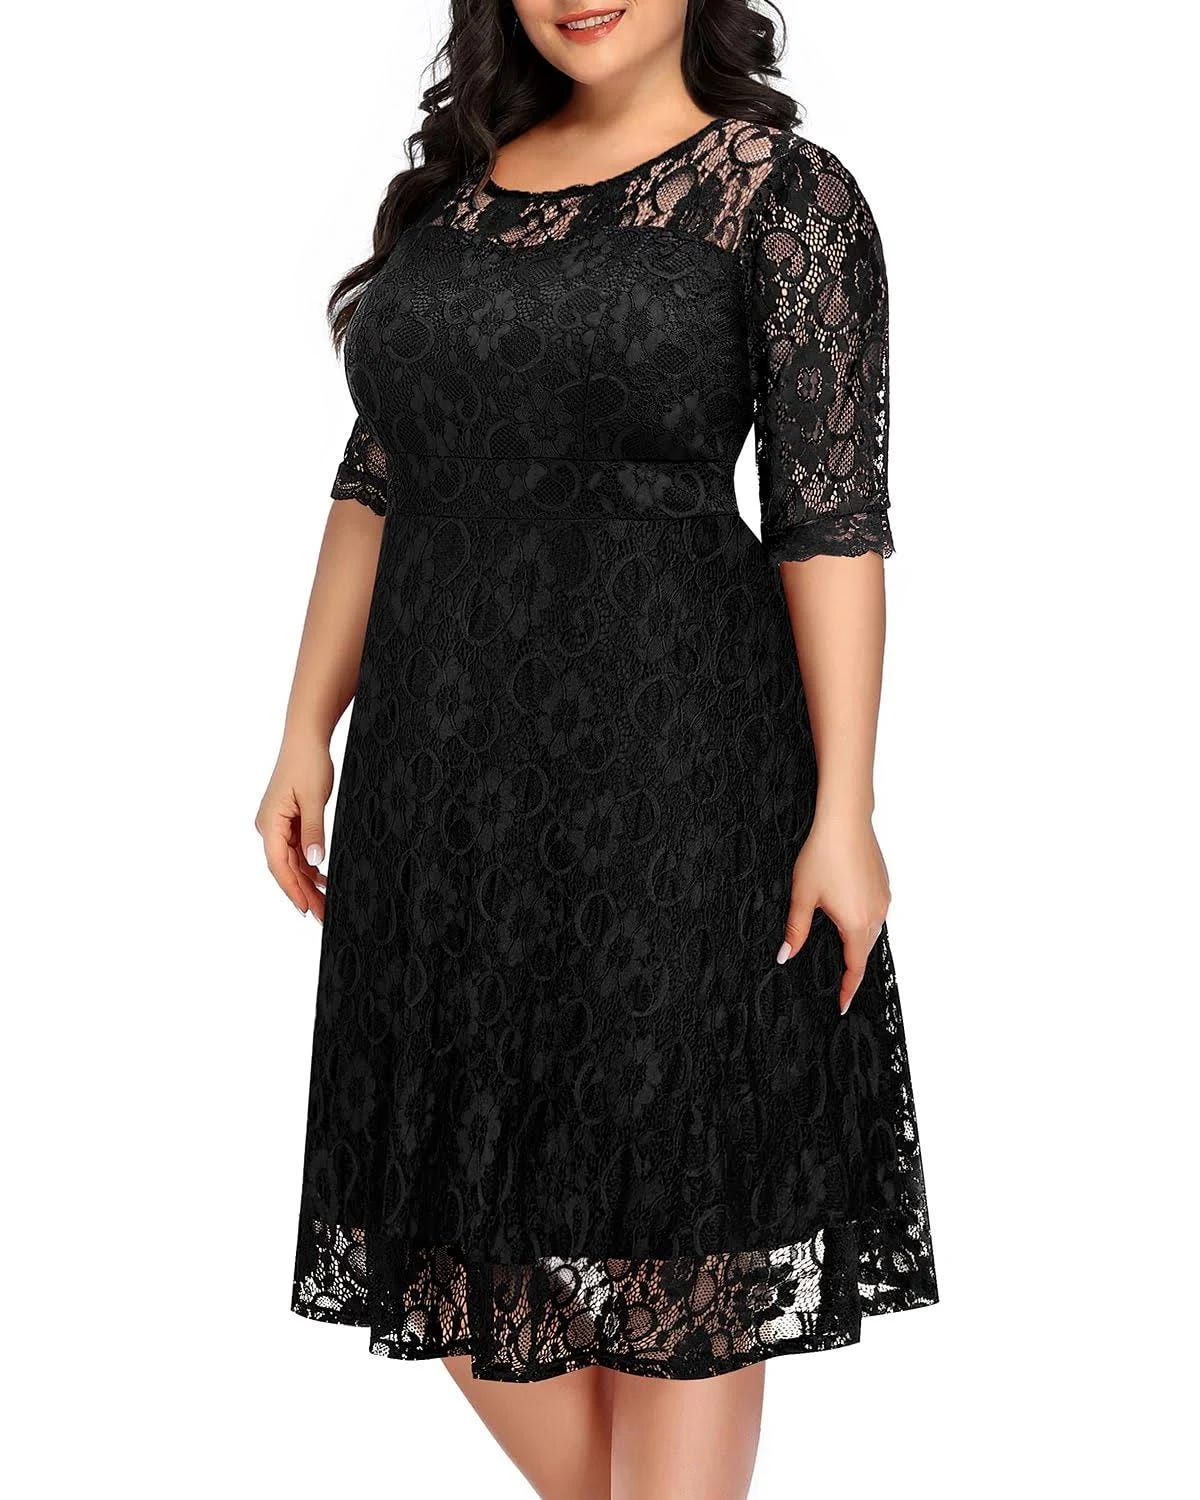 Stylish Plus-Size Cocktail Dress for Special Occasions | Image